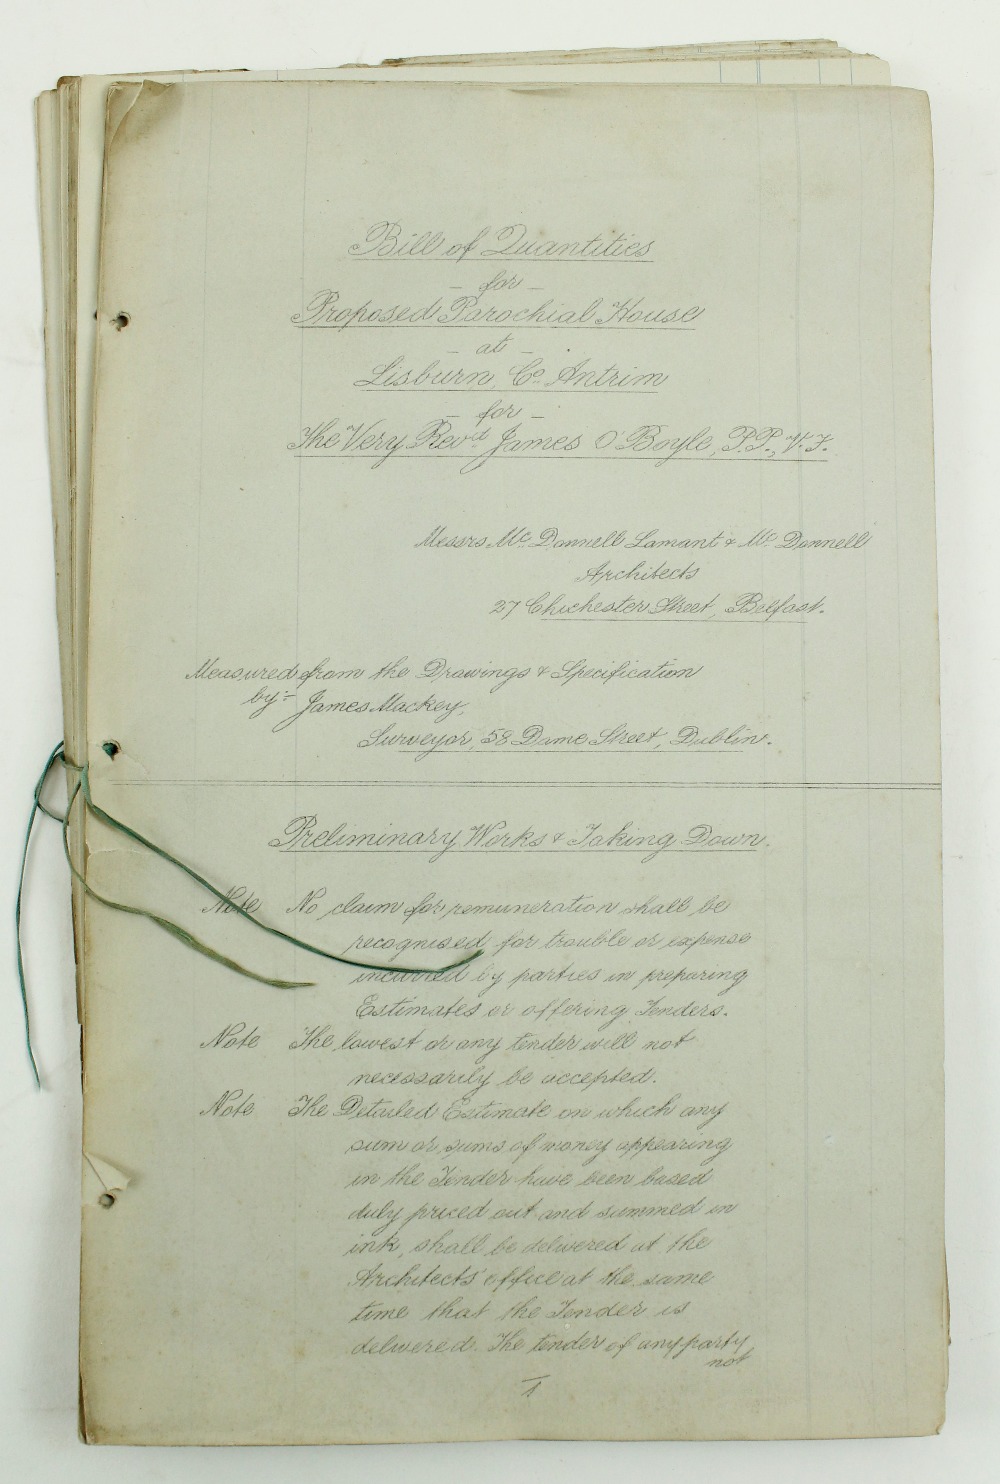 Co. Antrim interest: McDonnell, Lamant & Mc Donnell, Architects, Belfast. Bill of Quantities for